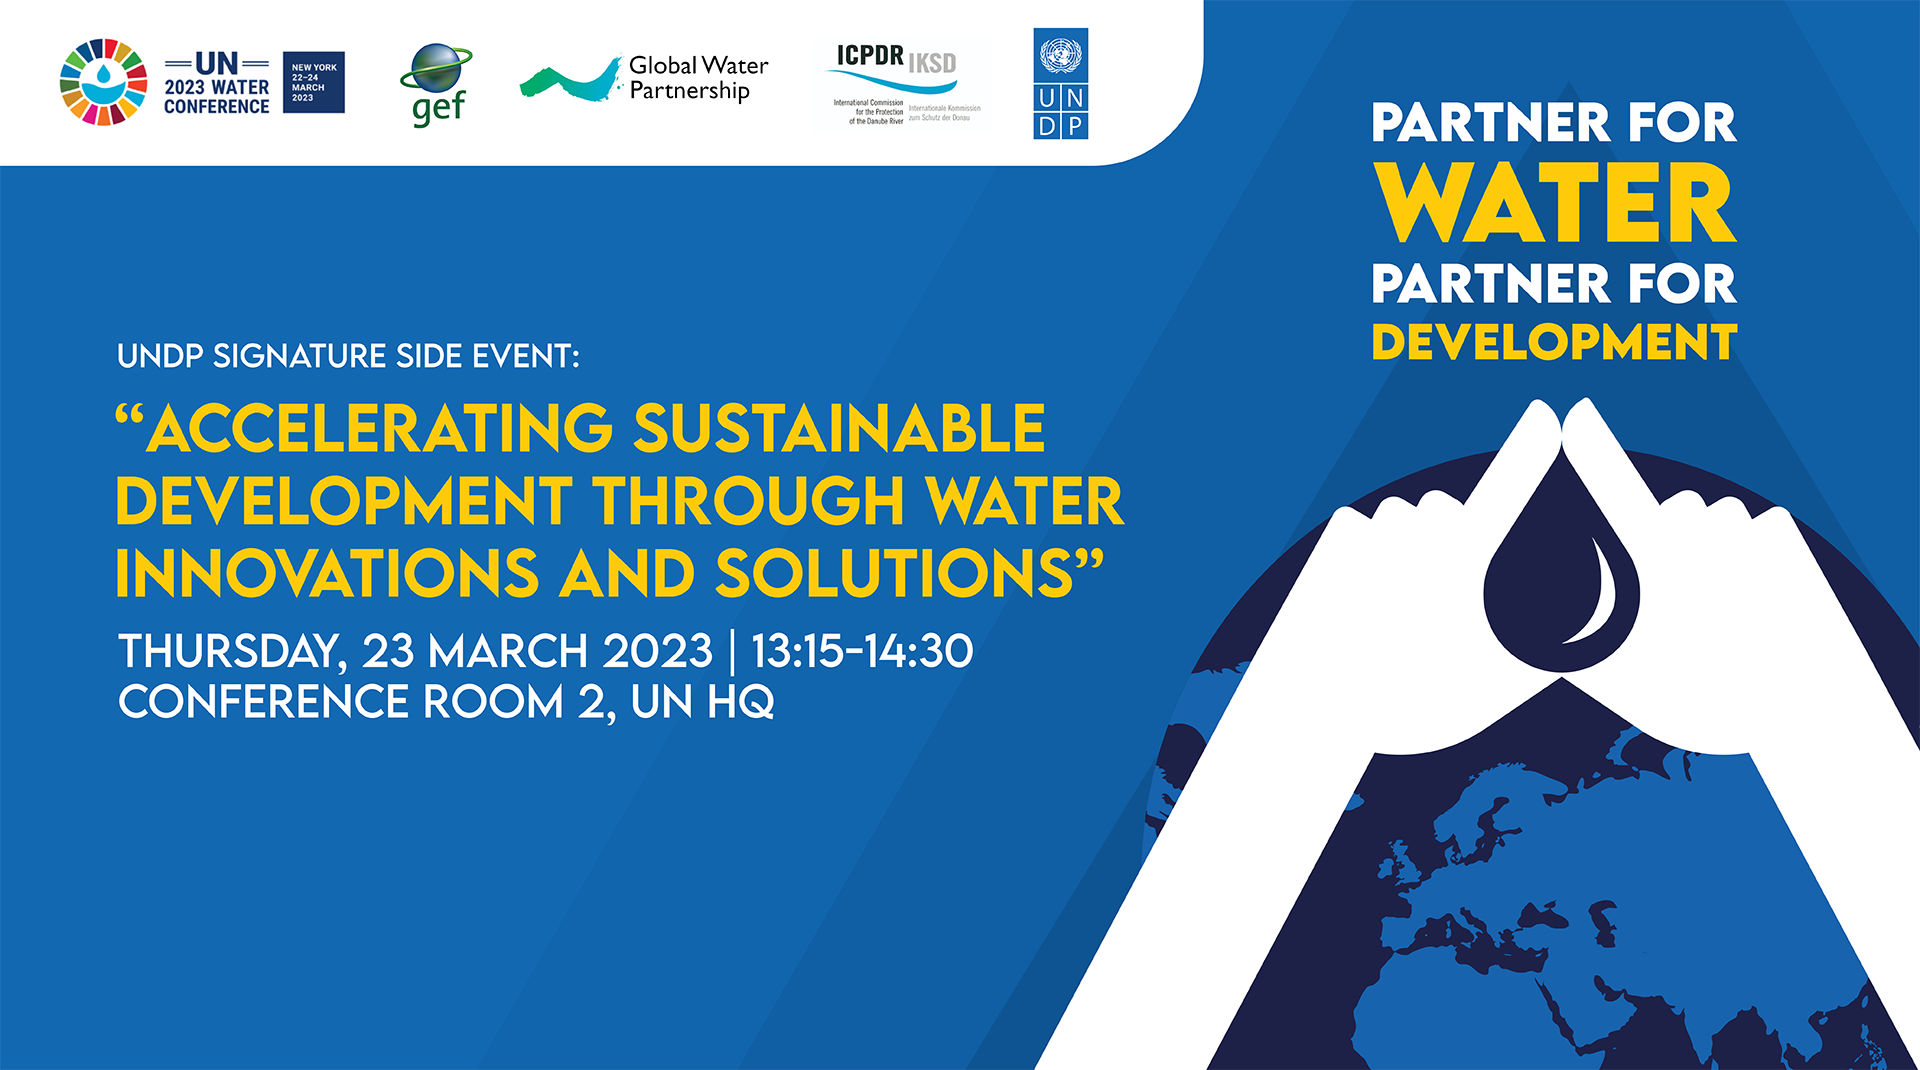 UNDP side event at the UN Water Conference